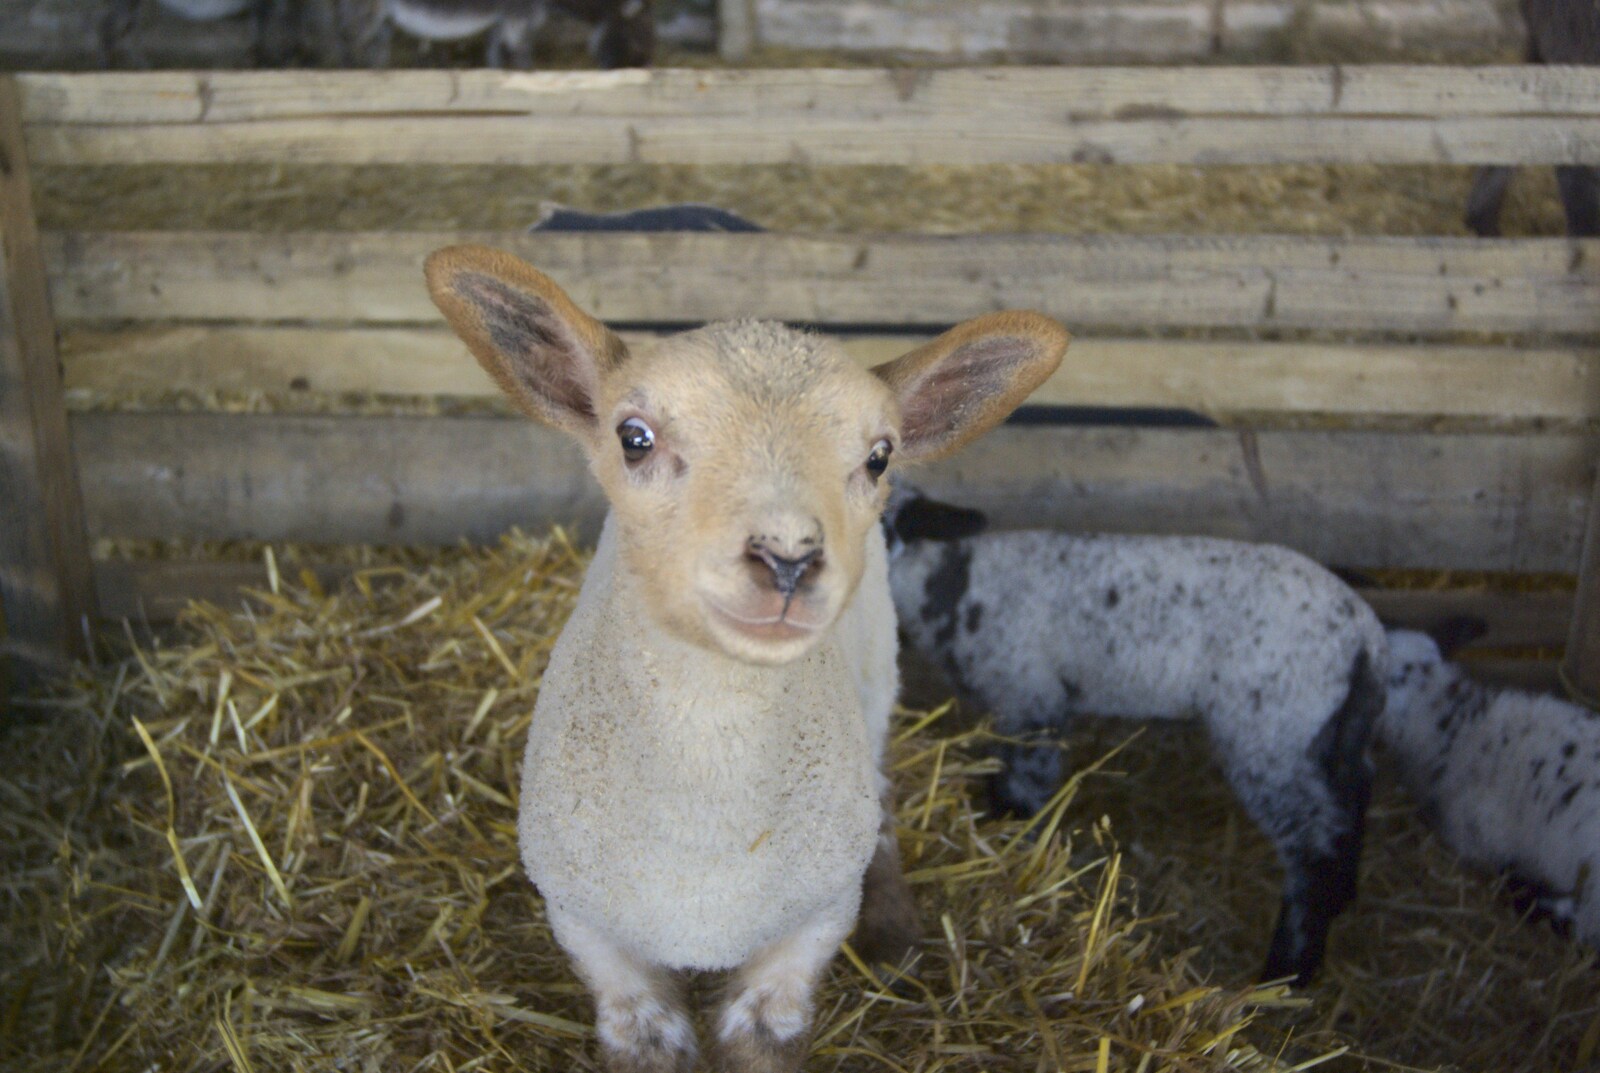 A small lamb stands atop a bale of straw from Easter in Chagford and Hoo Meavy, Devon - 3rd April 2010